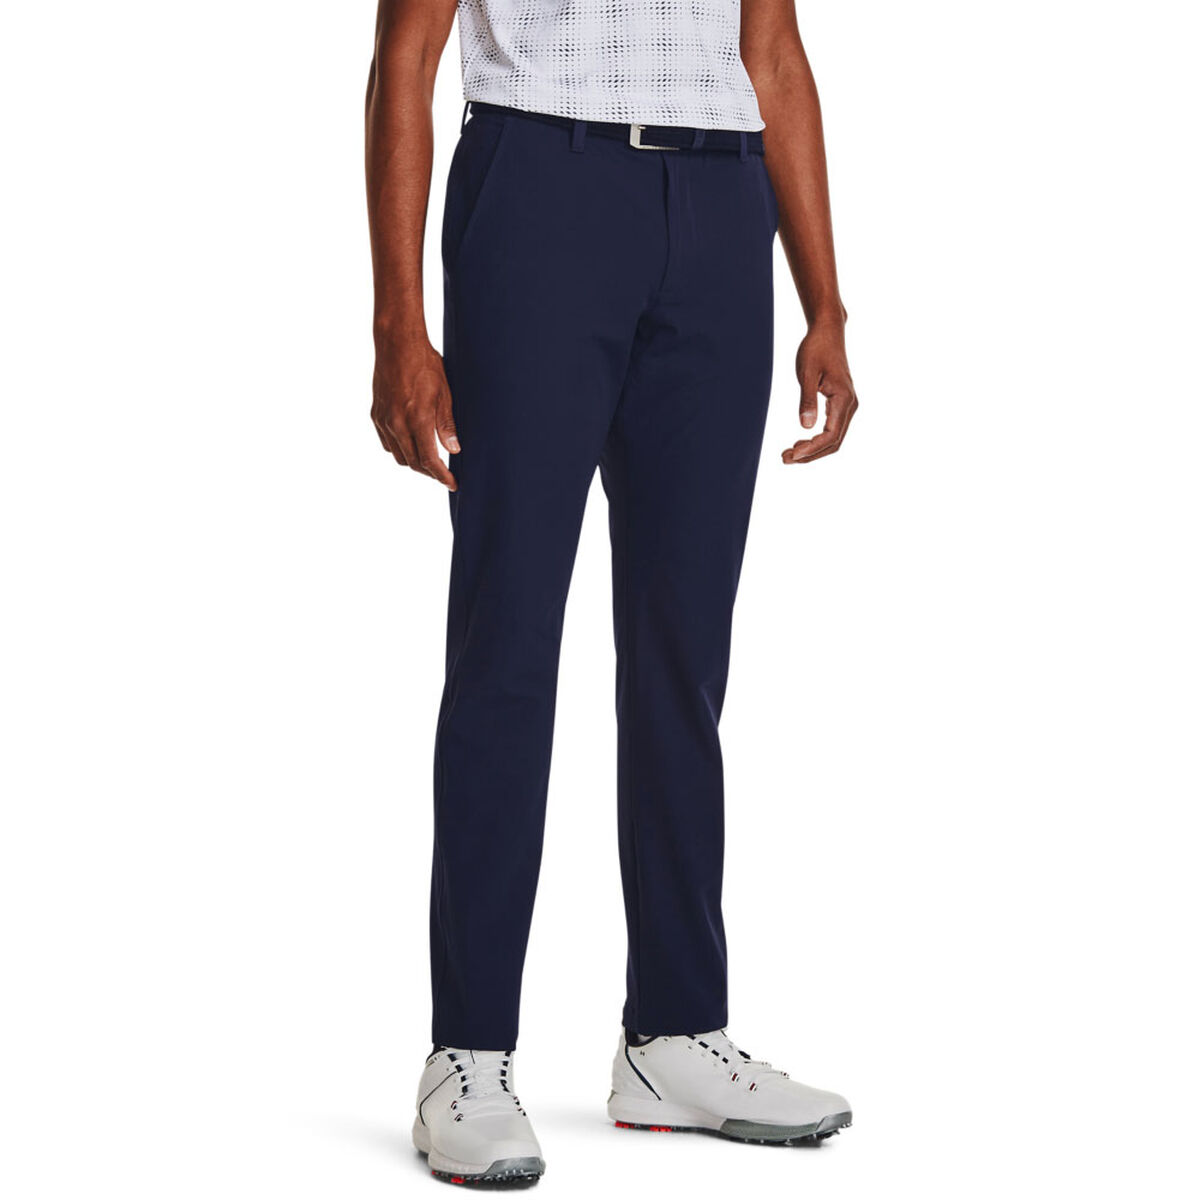 Under Armour Men's Drive Tapered Golf Trousers, Mens, Midnight navy/halo gray, 34, Long | American Golf von Under Armour